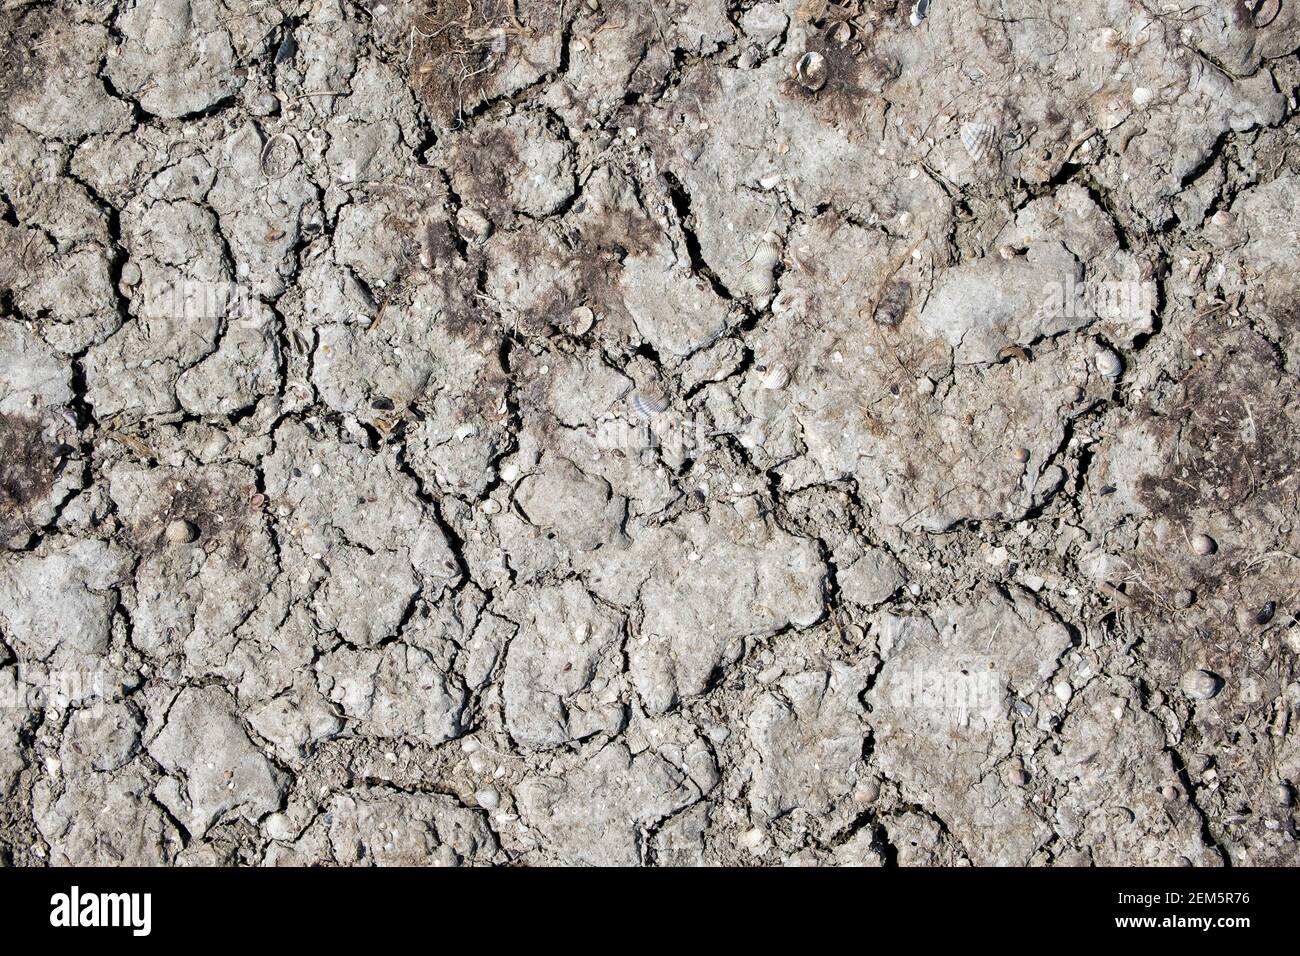 Texture of dry cracked earth with small seashells Stock Photo